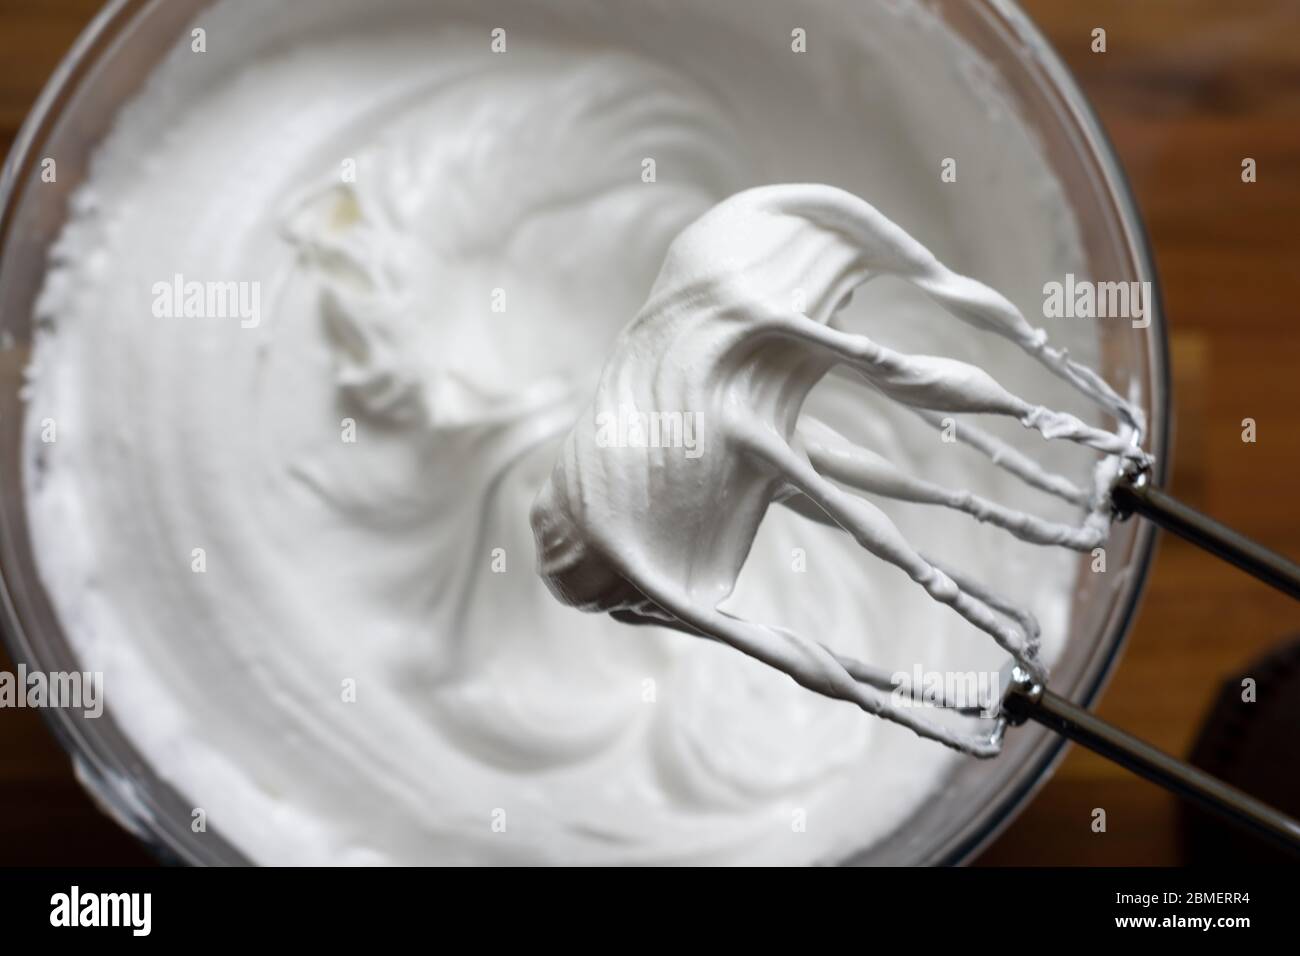 Electric mixer beaters above a soft mixed mergingue with the beaters still covered in the meringue Stock Photo